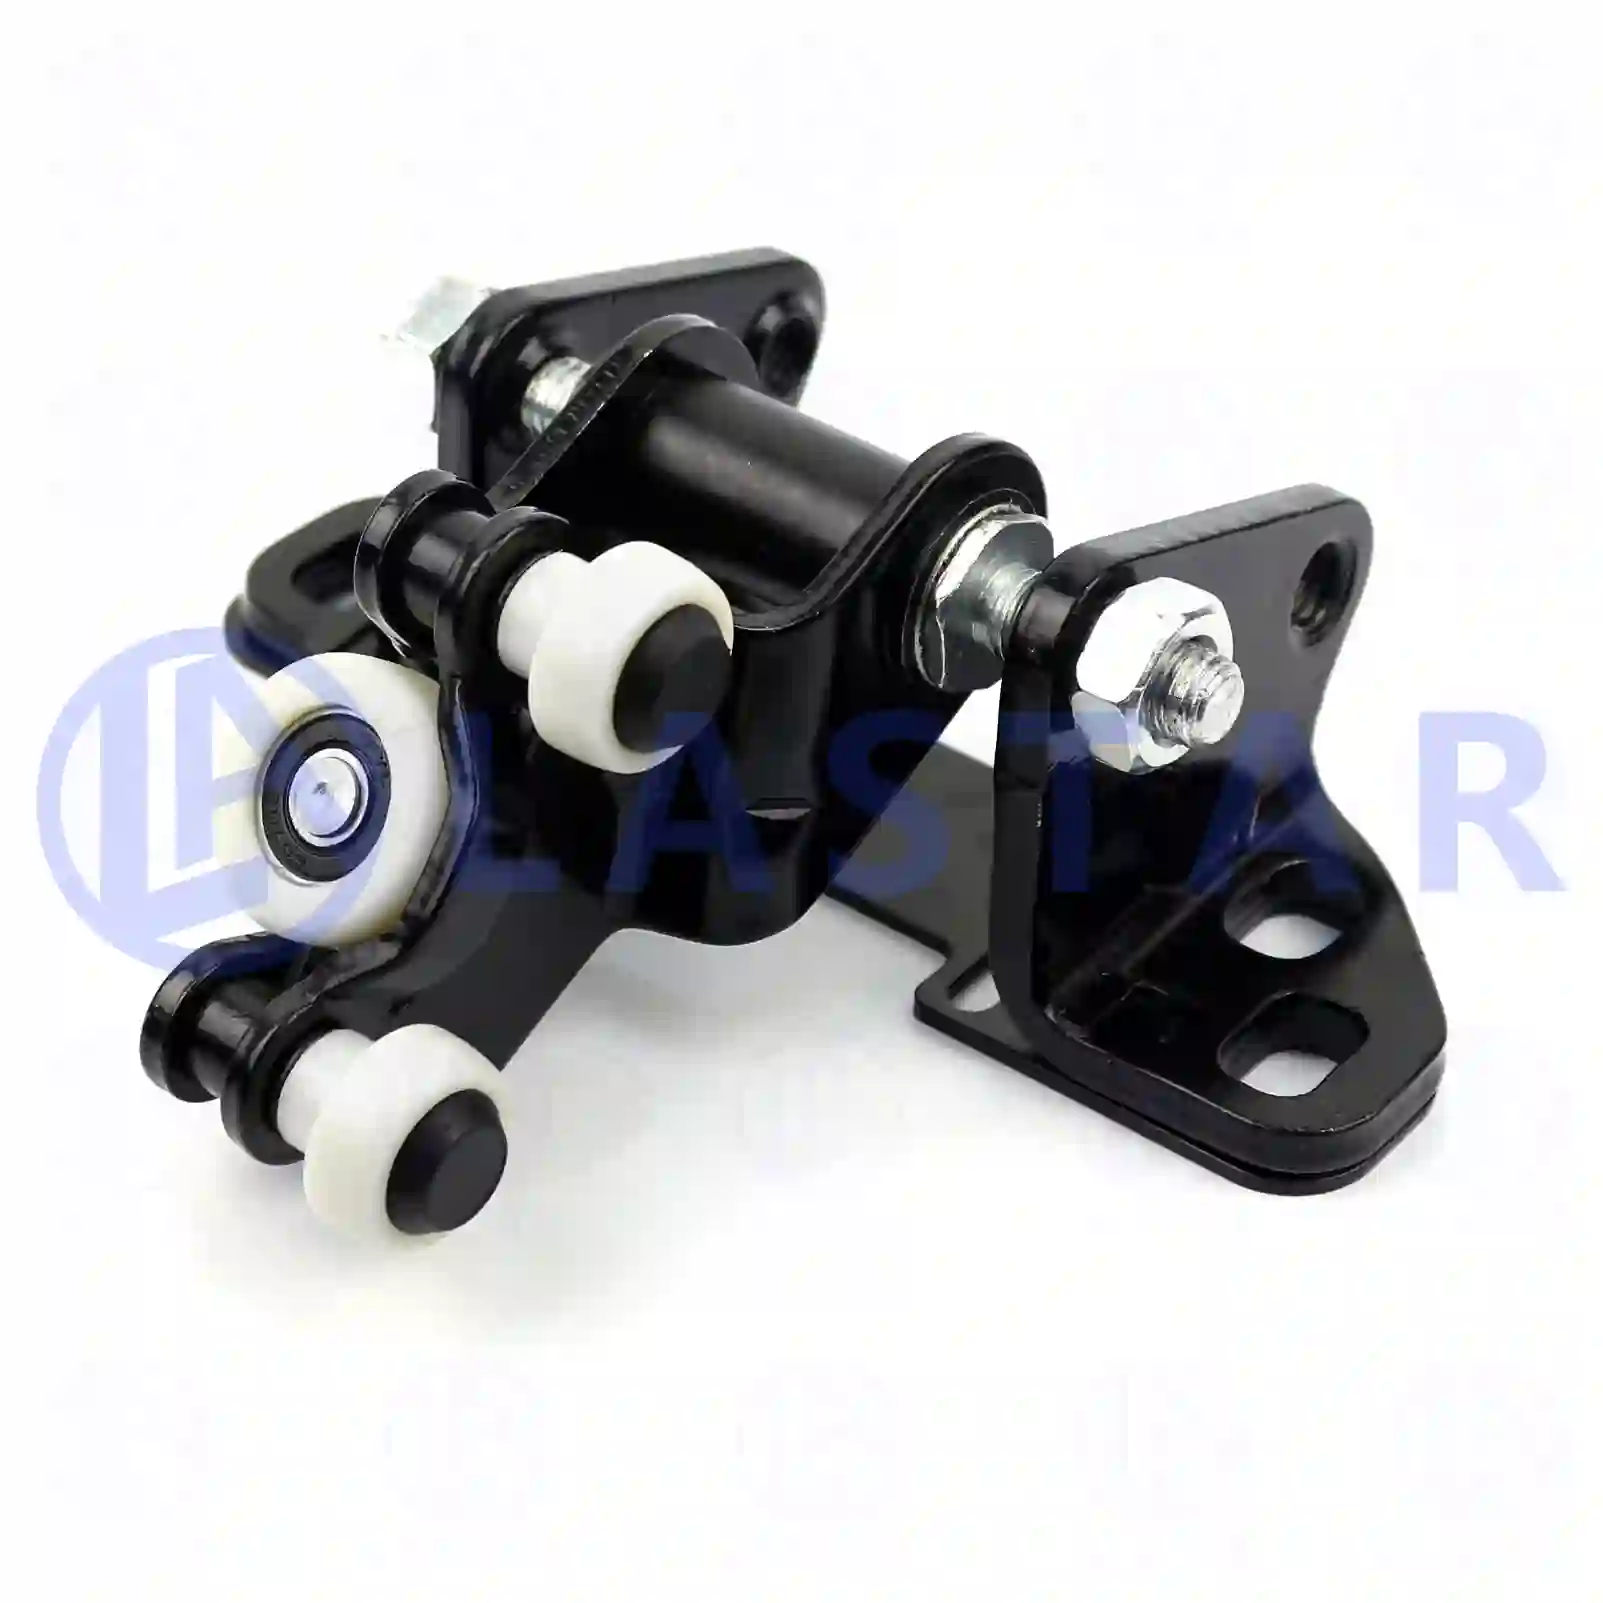 Roller guide, sliding door, right, 77719367, 9067600347, 2E1843336, ZG61087-0008 ||  77719367 Lastar Spare Part | Truck Spare Parts, Auotomotive Spare Parts Roller guide, sliding door, right, 77719367, 9067600347, 2E1843336, ZG61087-0008 ||  77719367 Lastar Spare Part | Truck Spare Parts, Auotomotive Spare Parts